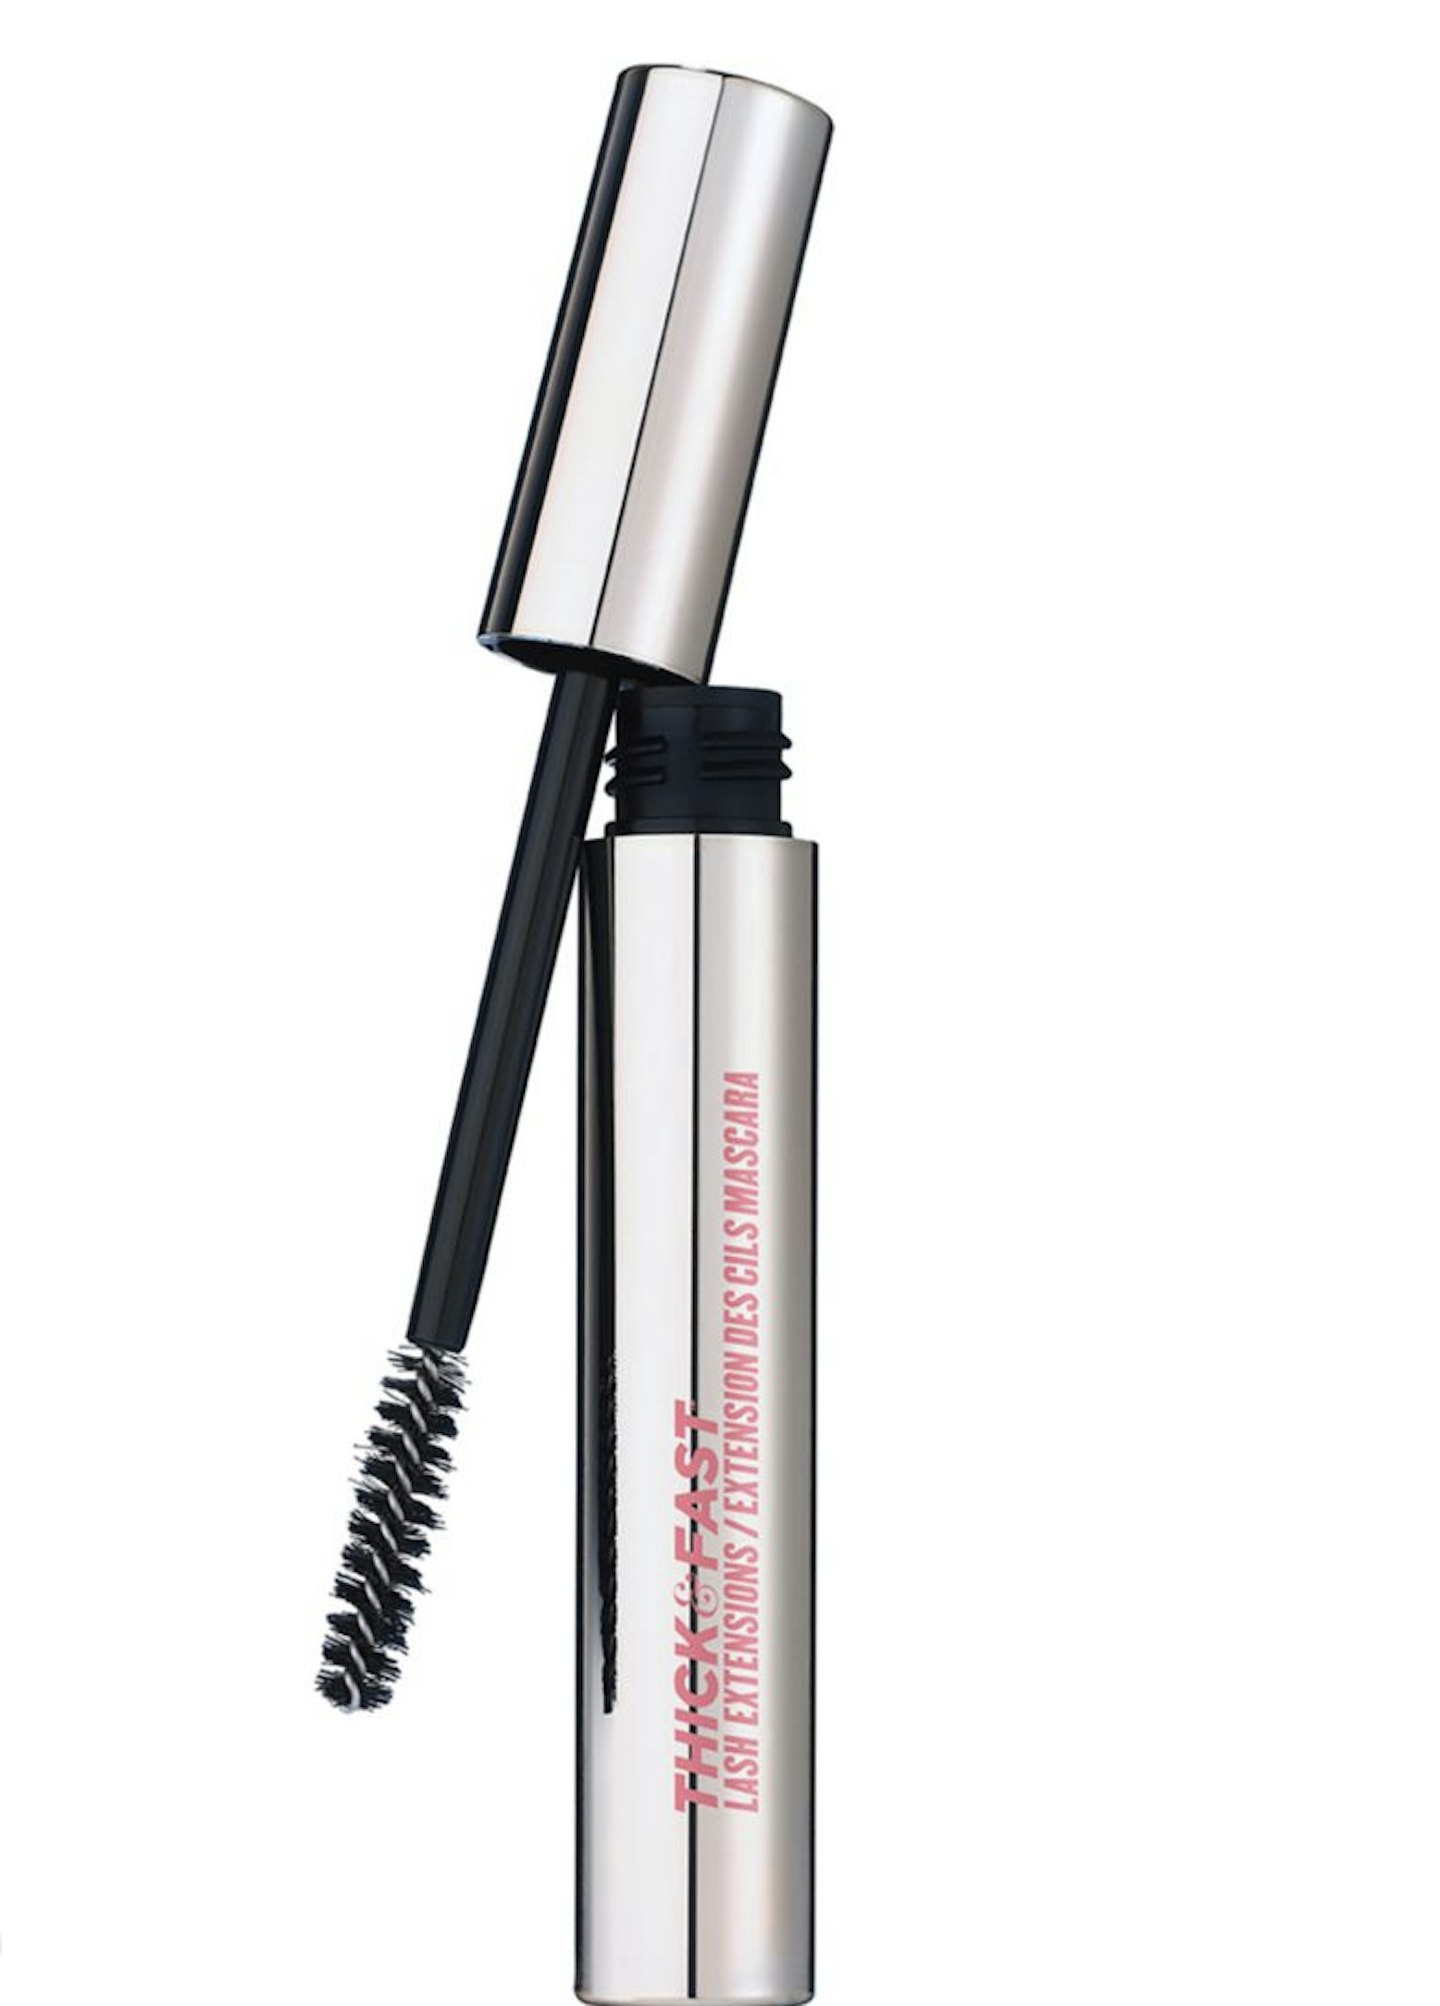 Soap & Glory Thick & Fast Flash Extensions Mascara